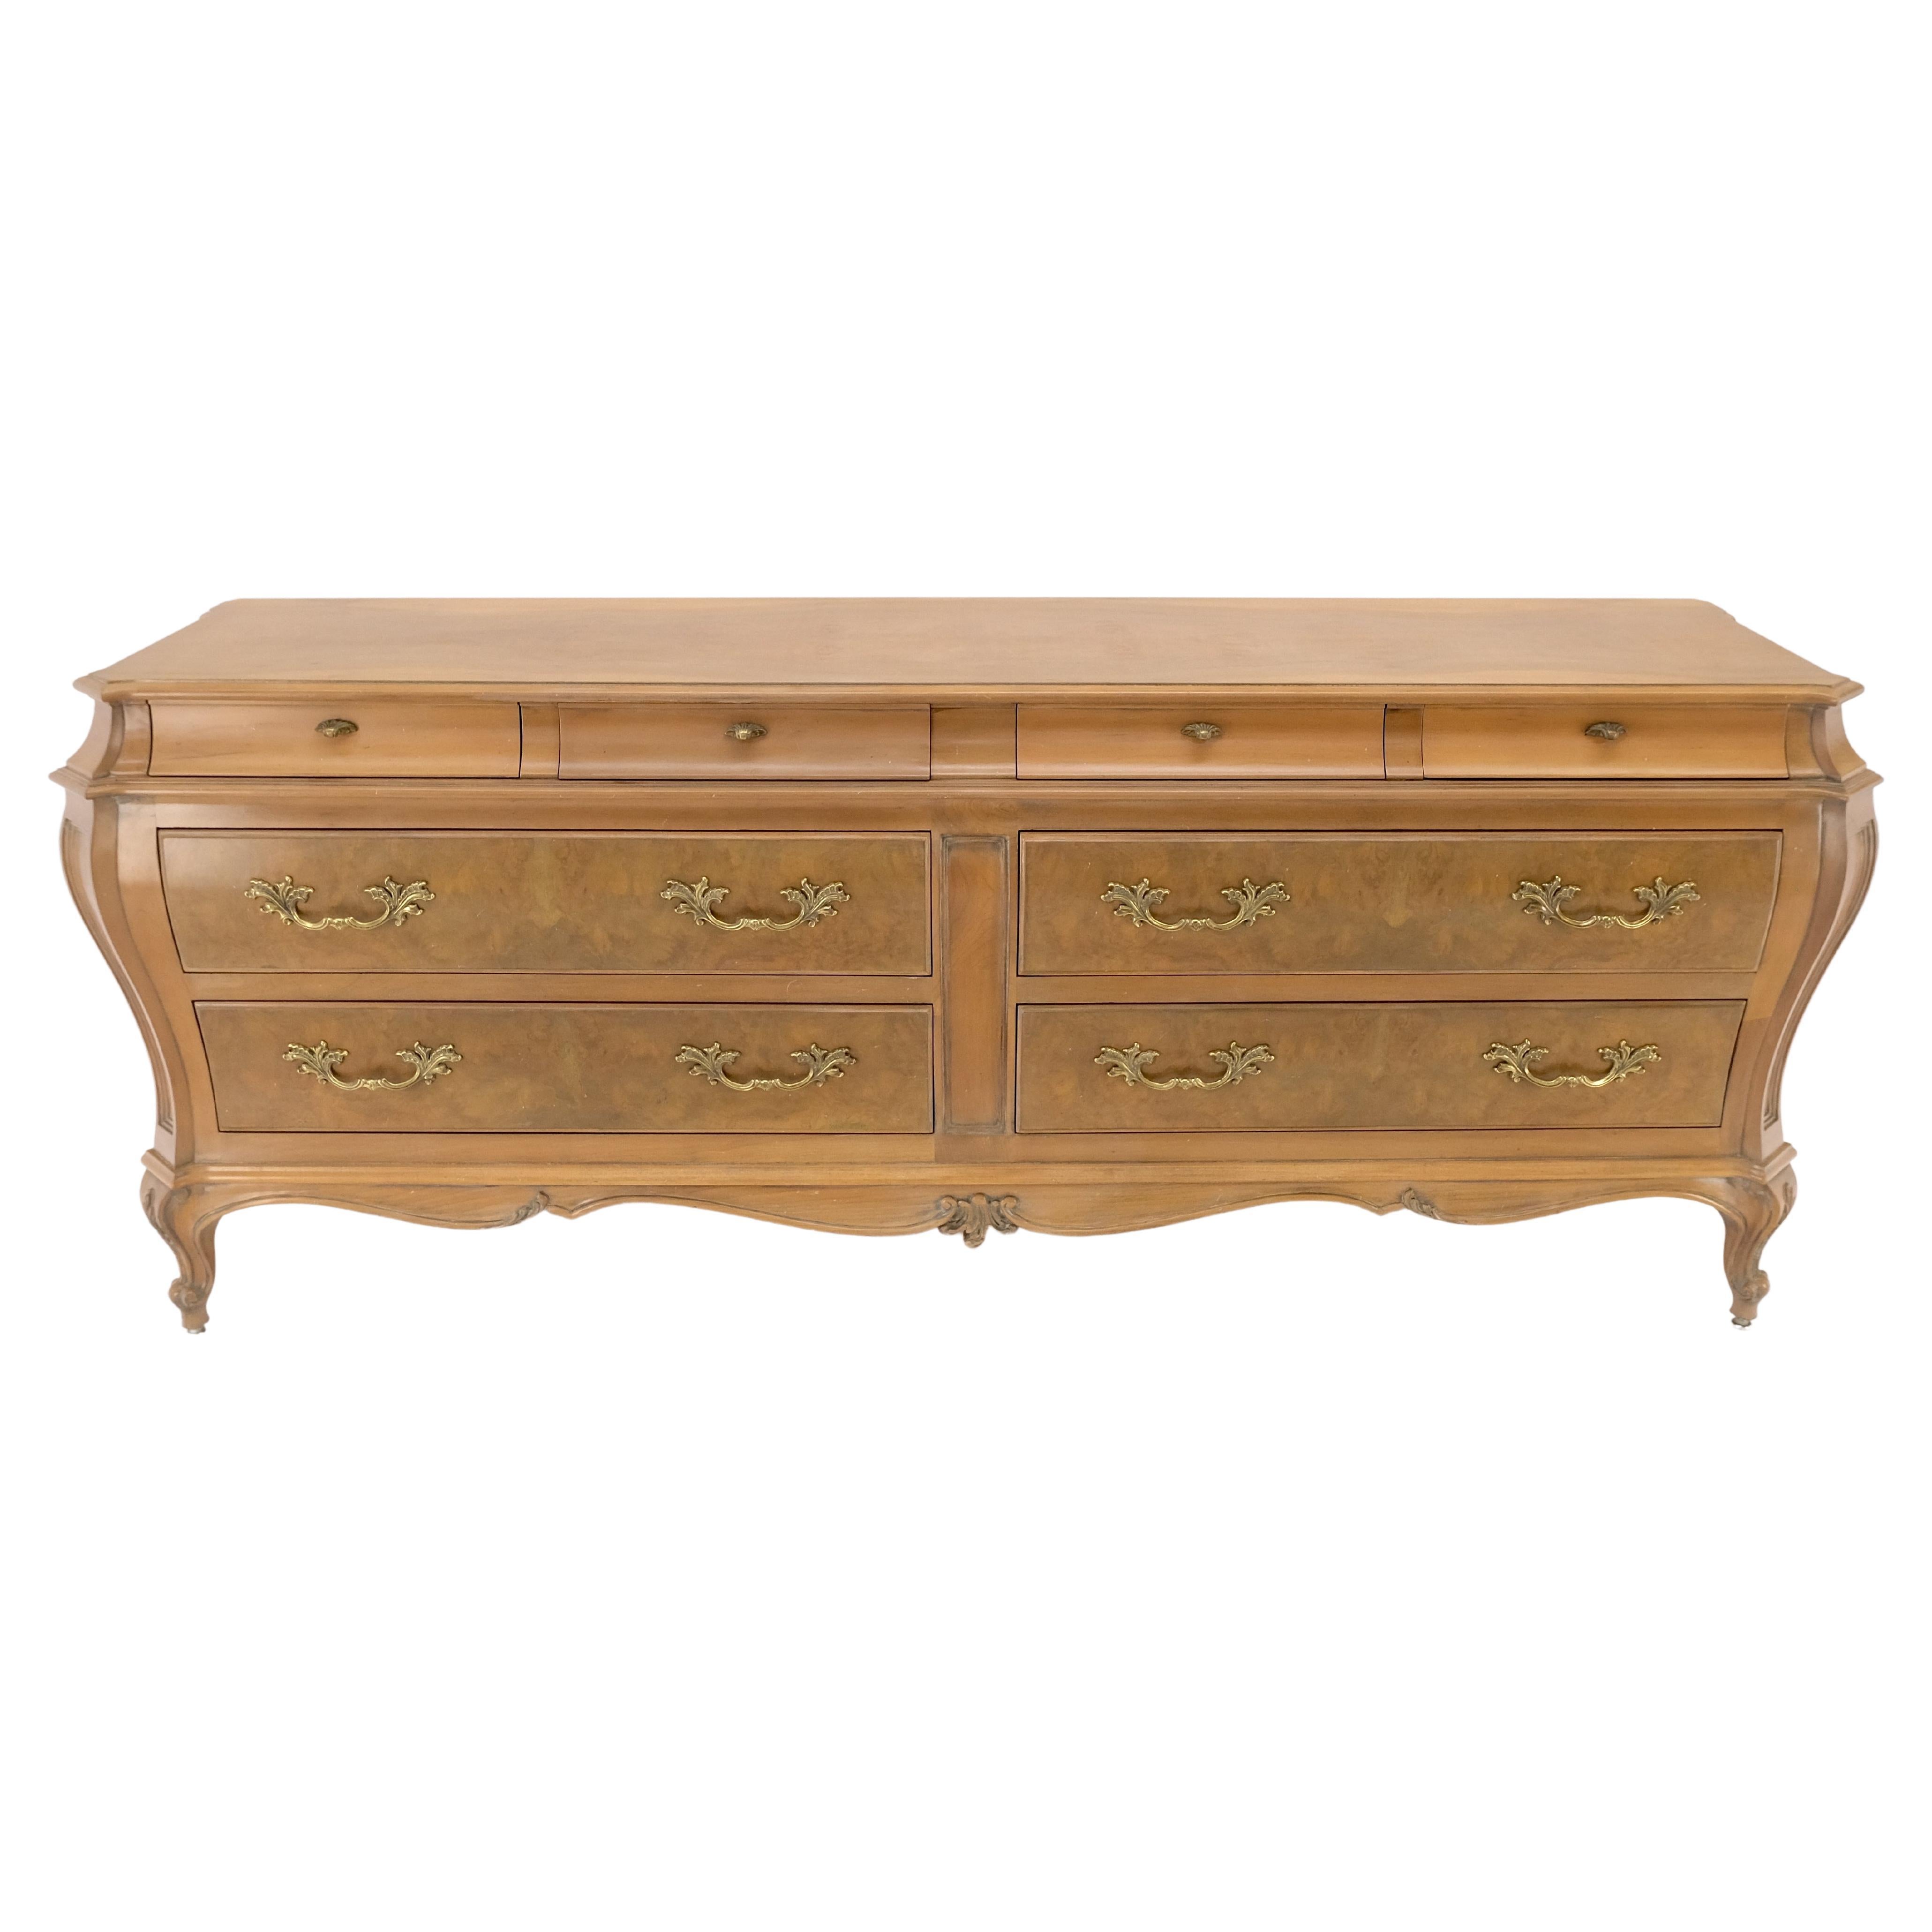 Long Country French Bombe 8 Drawer White Wash Burl Dresser Credenza Solid & Mint For Sale